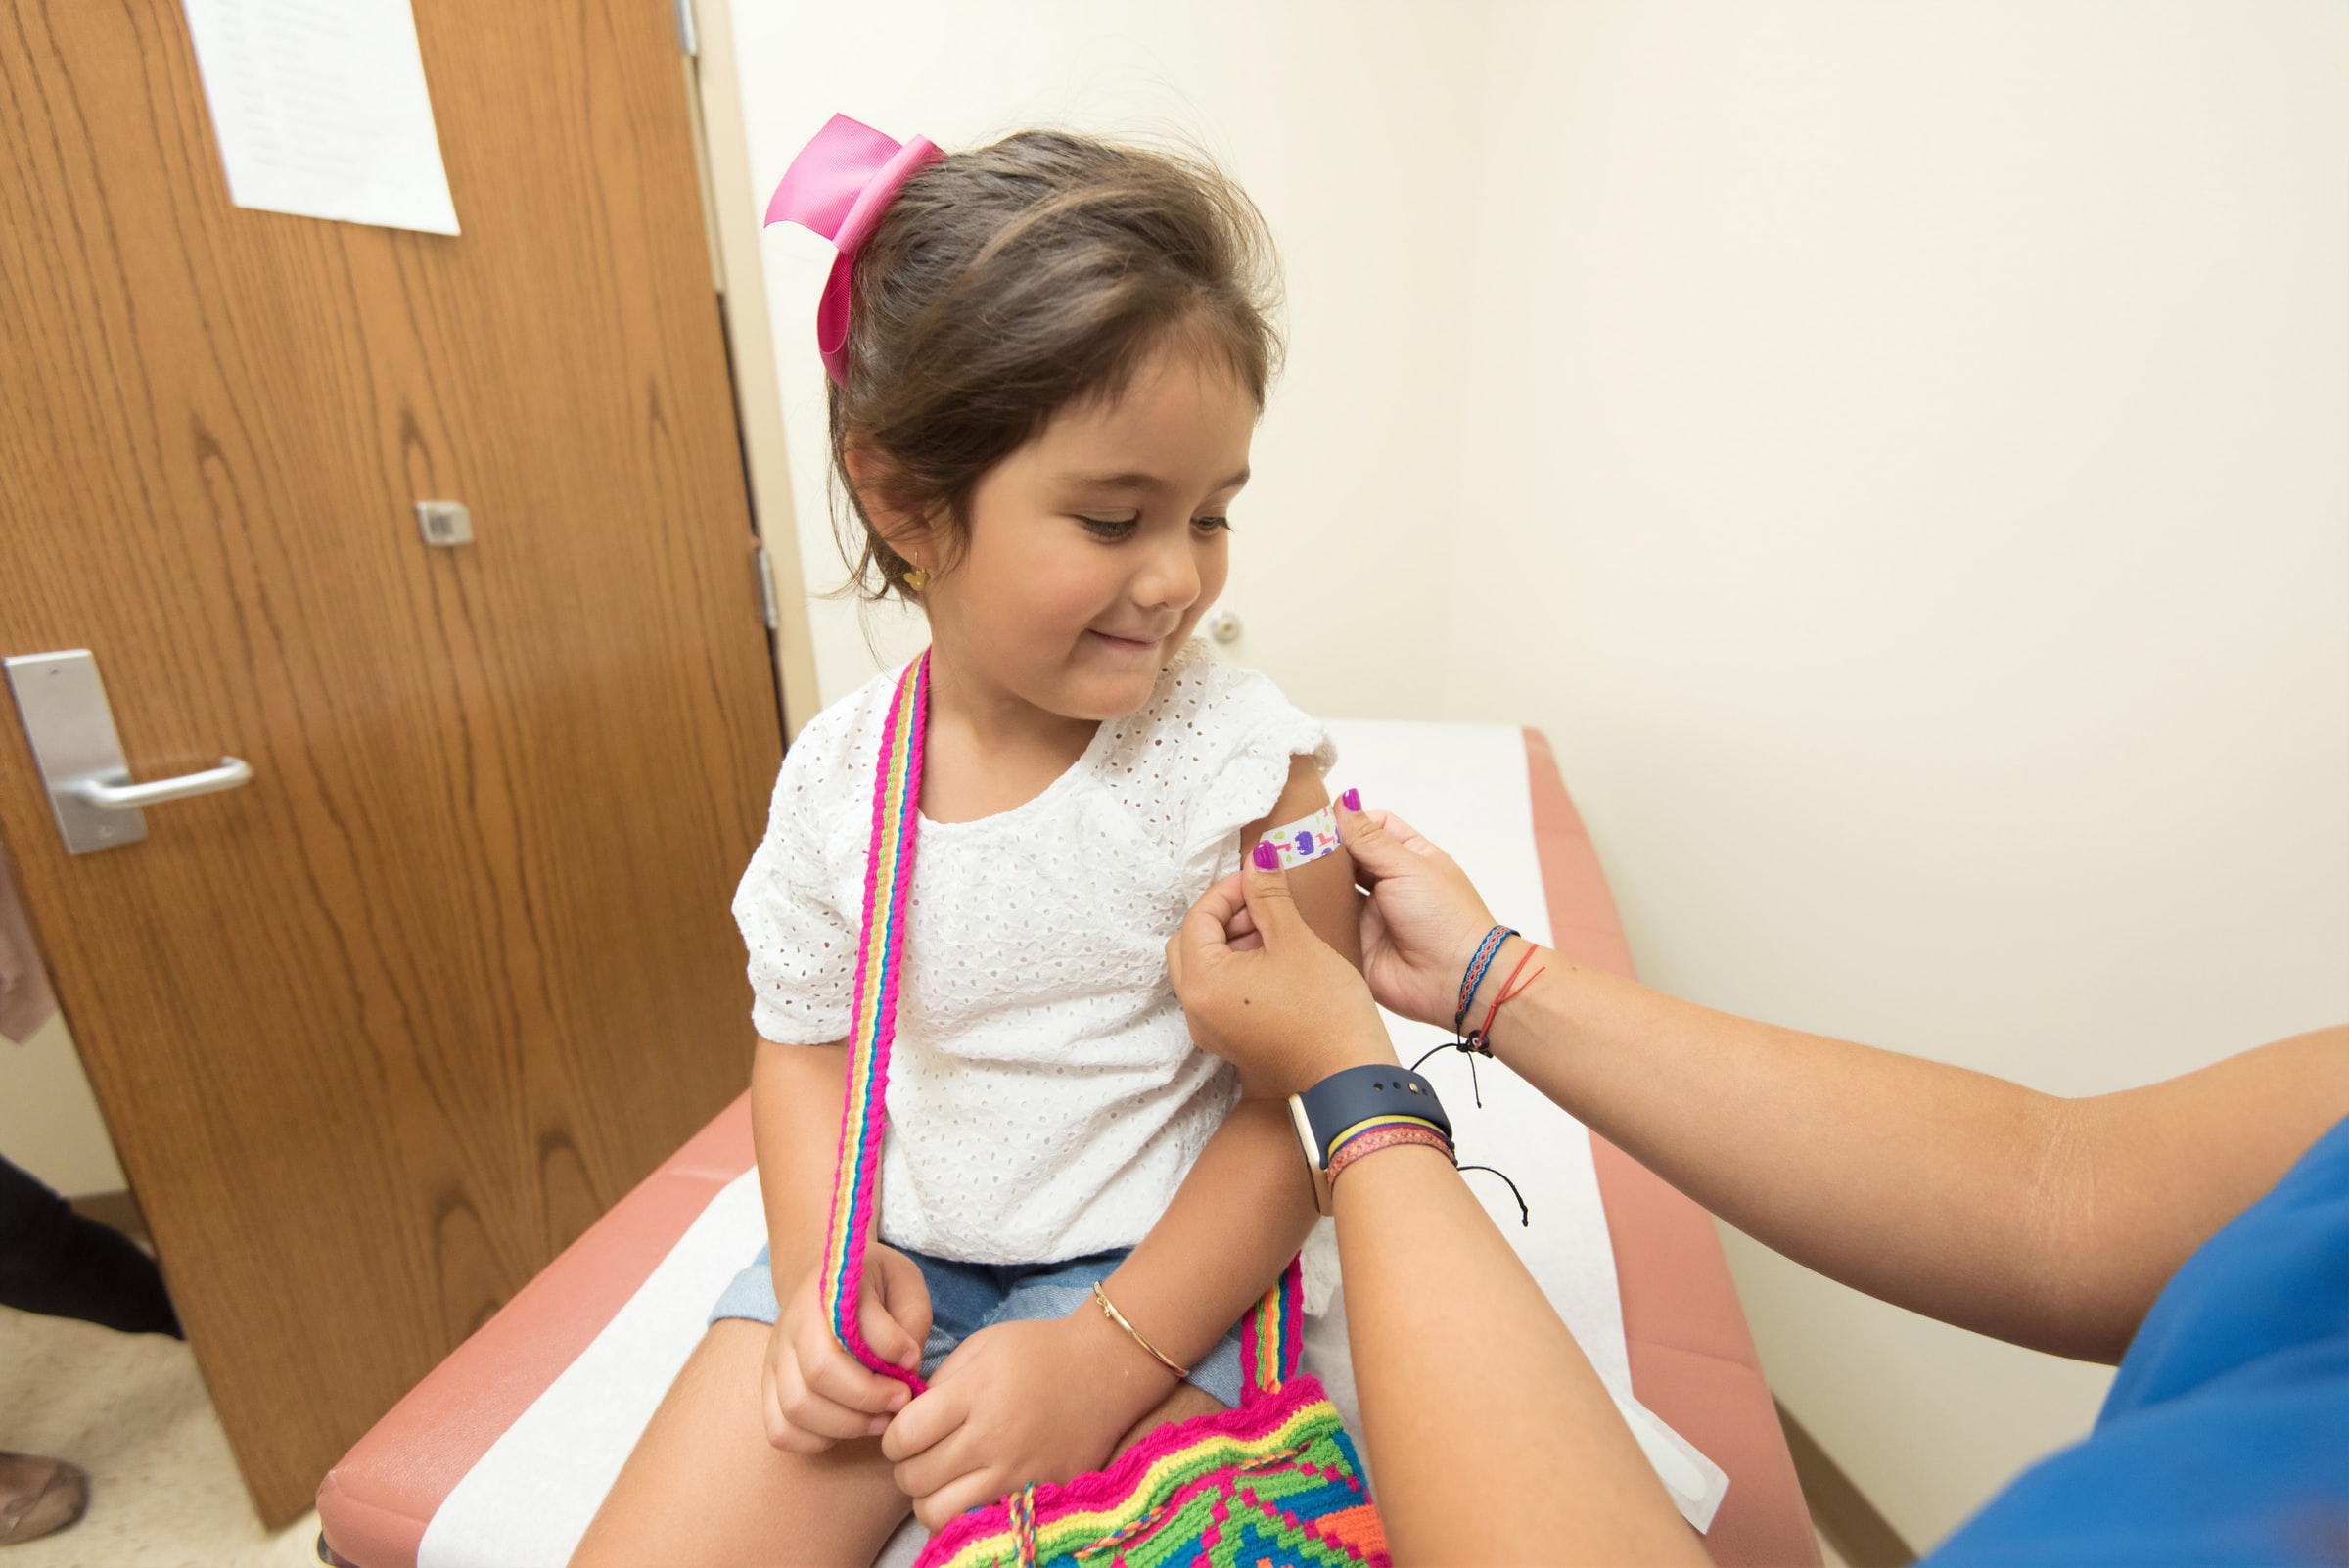 A girl getting her vaccine